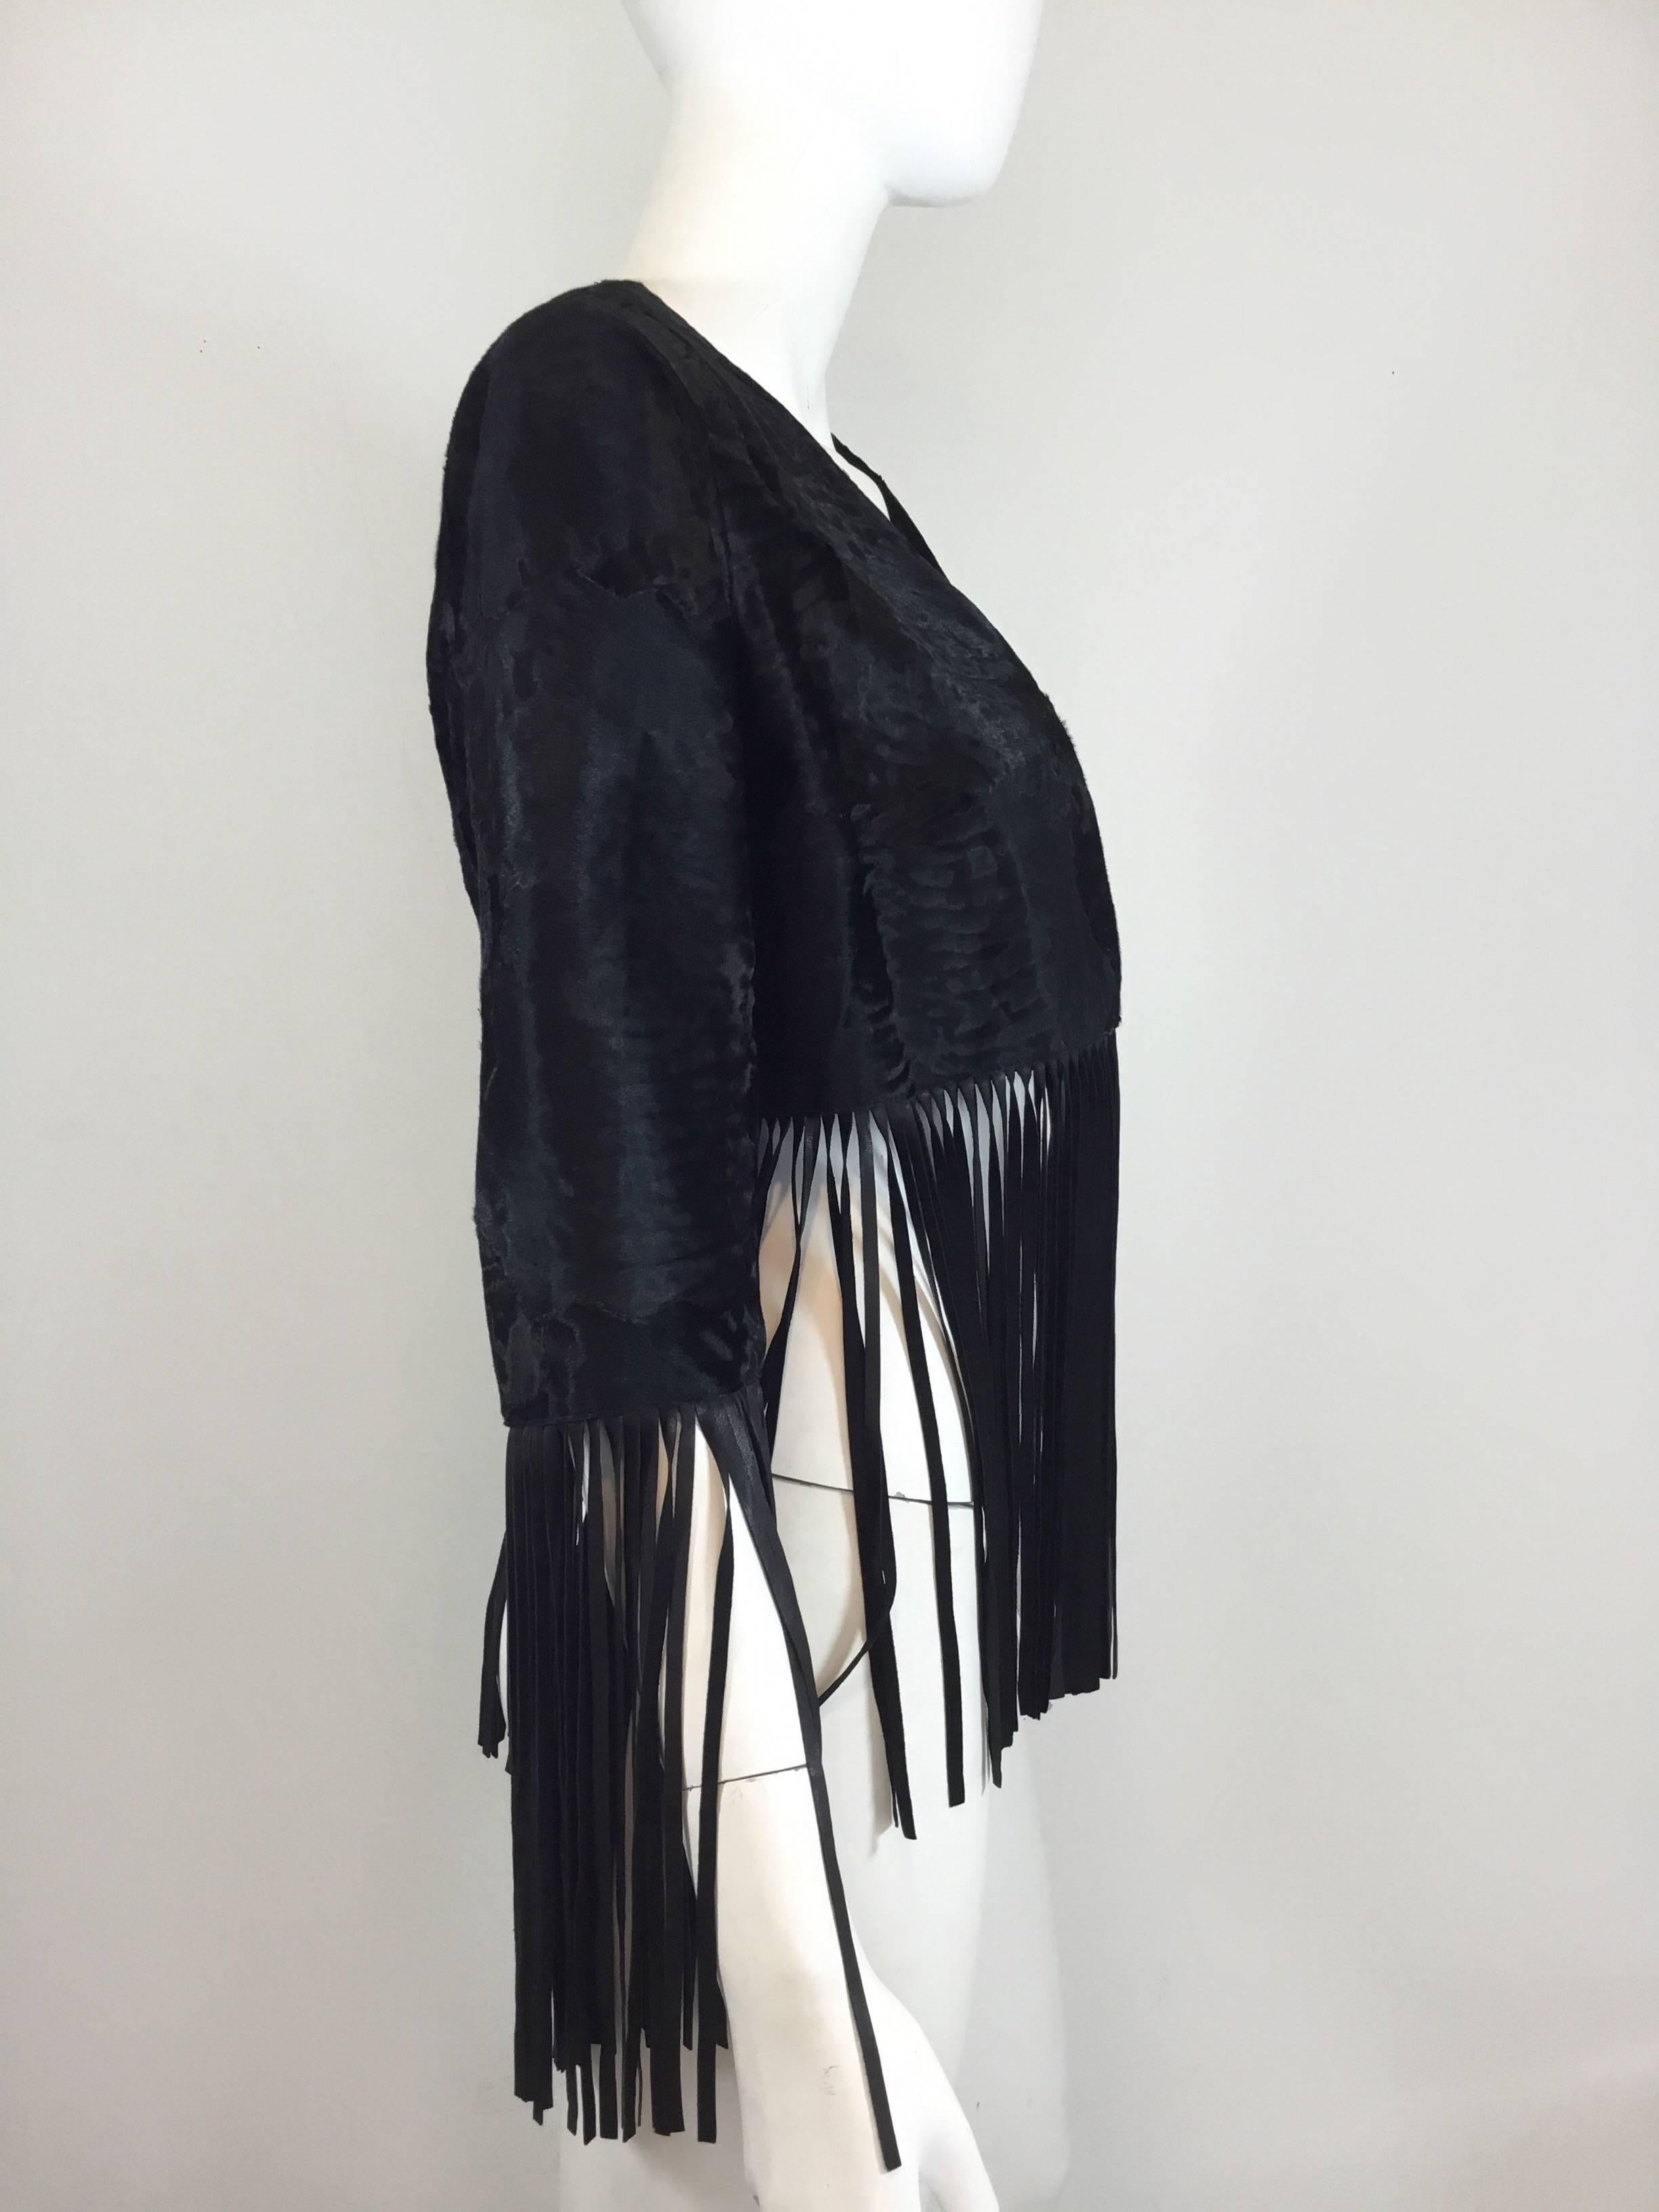 Bisang Couture jacket featured in a black broadtail fur with leather fringing along the sleeves and hem. Fully lined.

Bust 34''. sleeves 16'' (26'' including fringe trim), length 14'' (25'' including fringe trim)